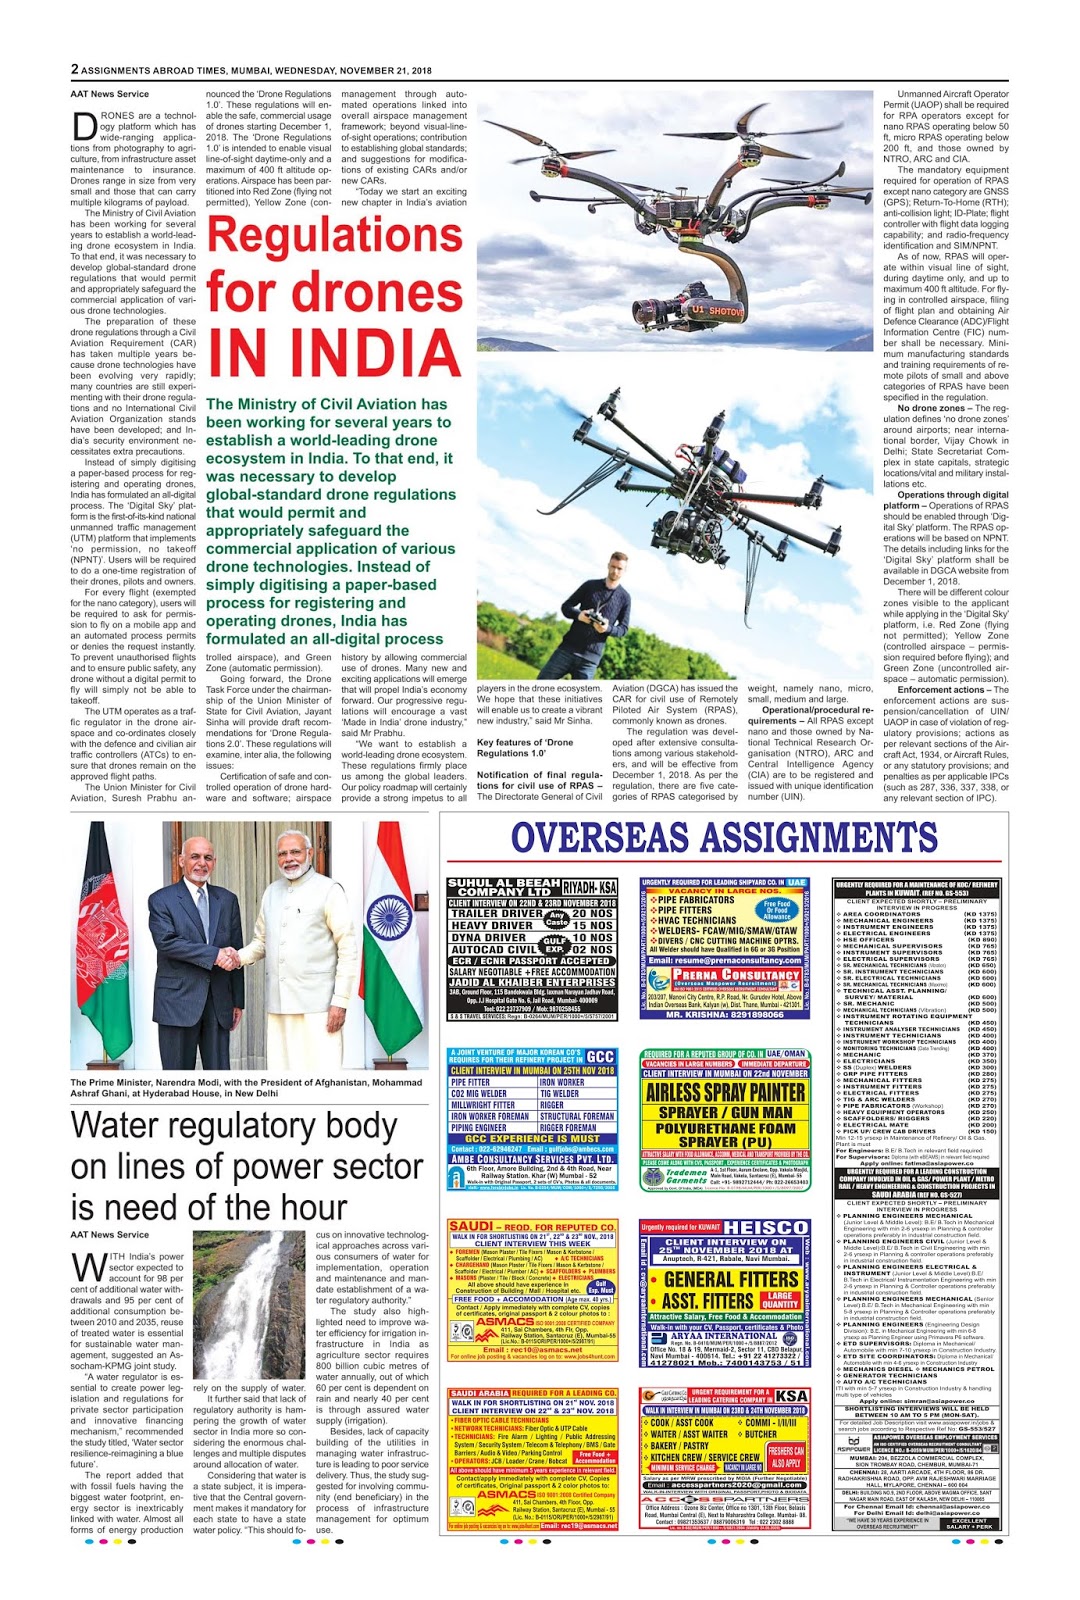 overseas assignment abroad times newspaper